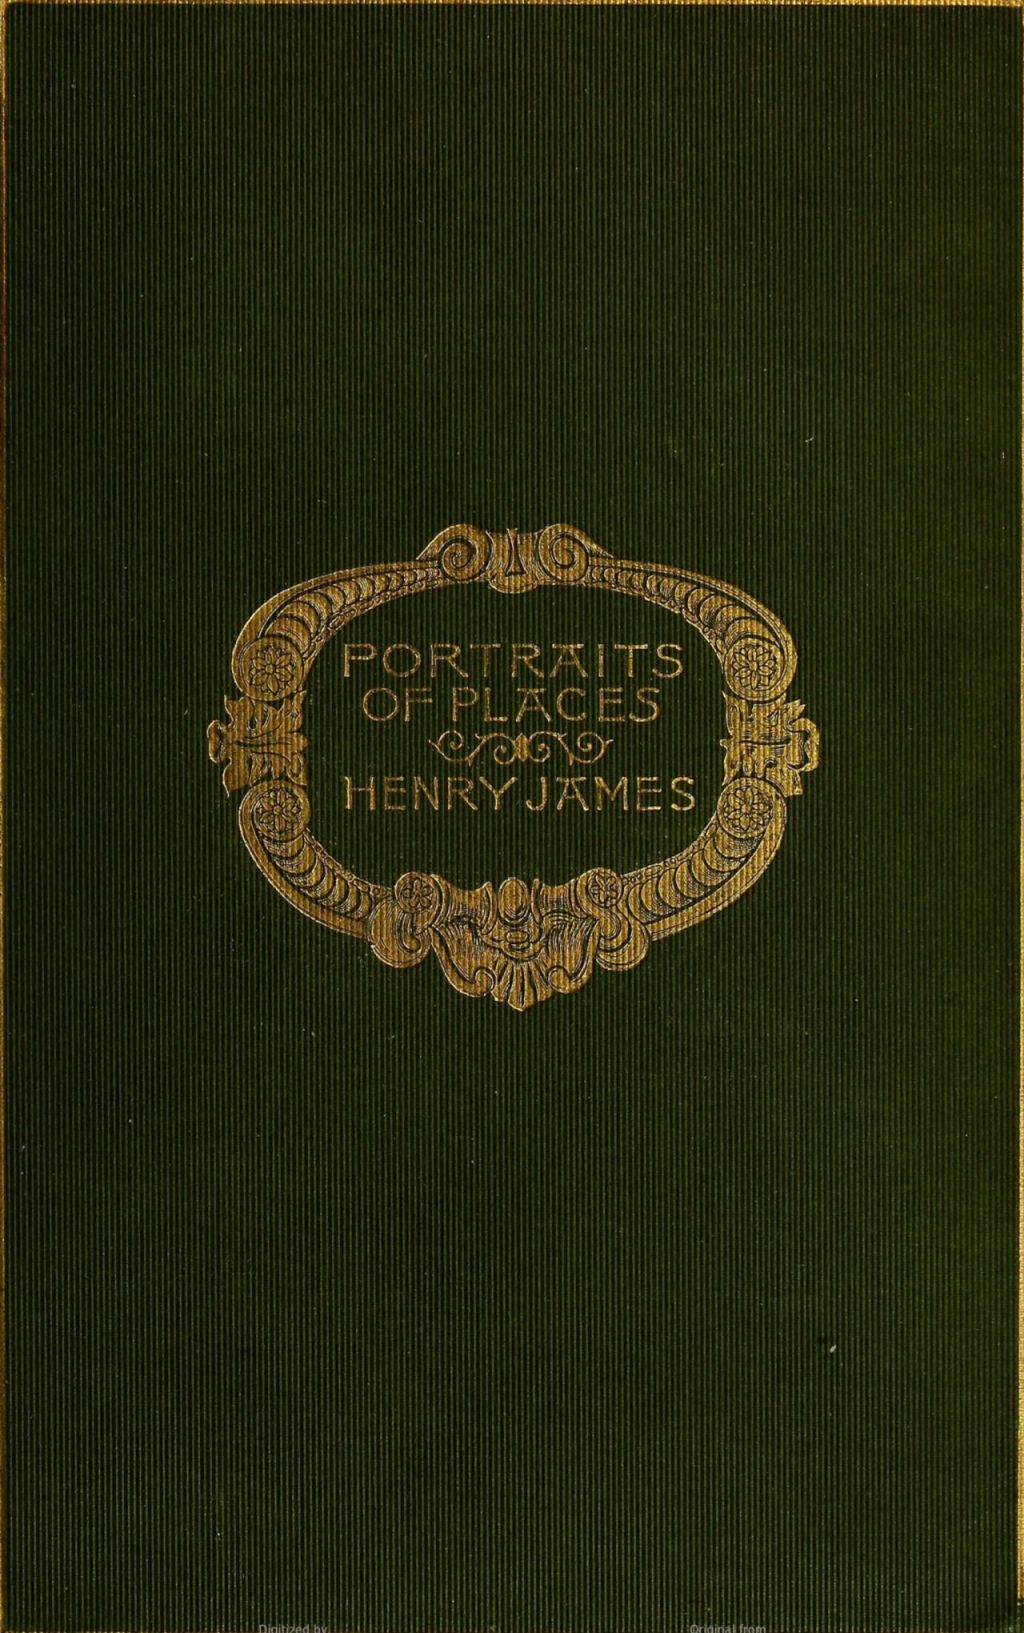 The Project Gutenberg eBook of Portraits of places, by Henry James. photo picture